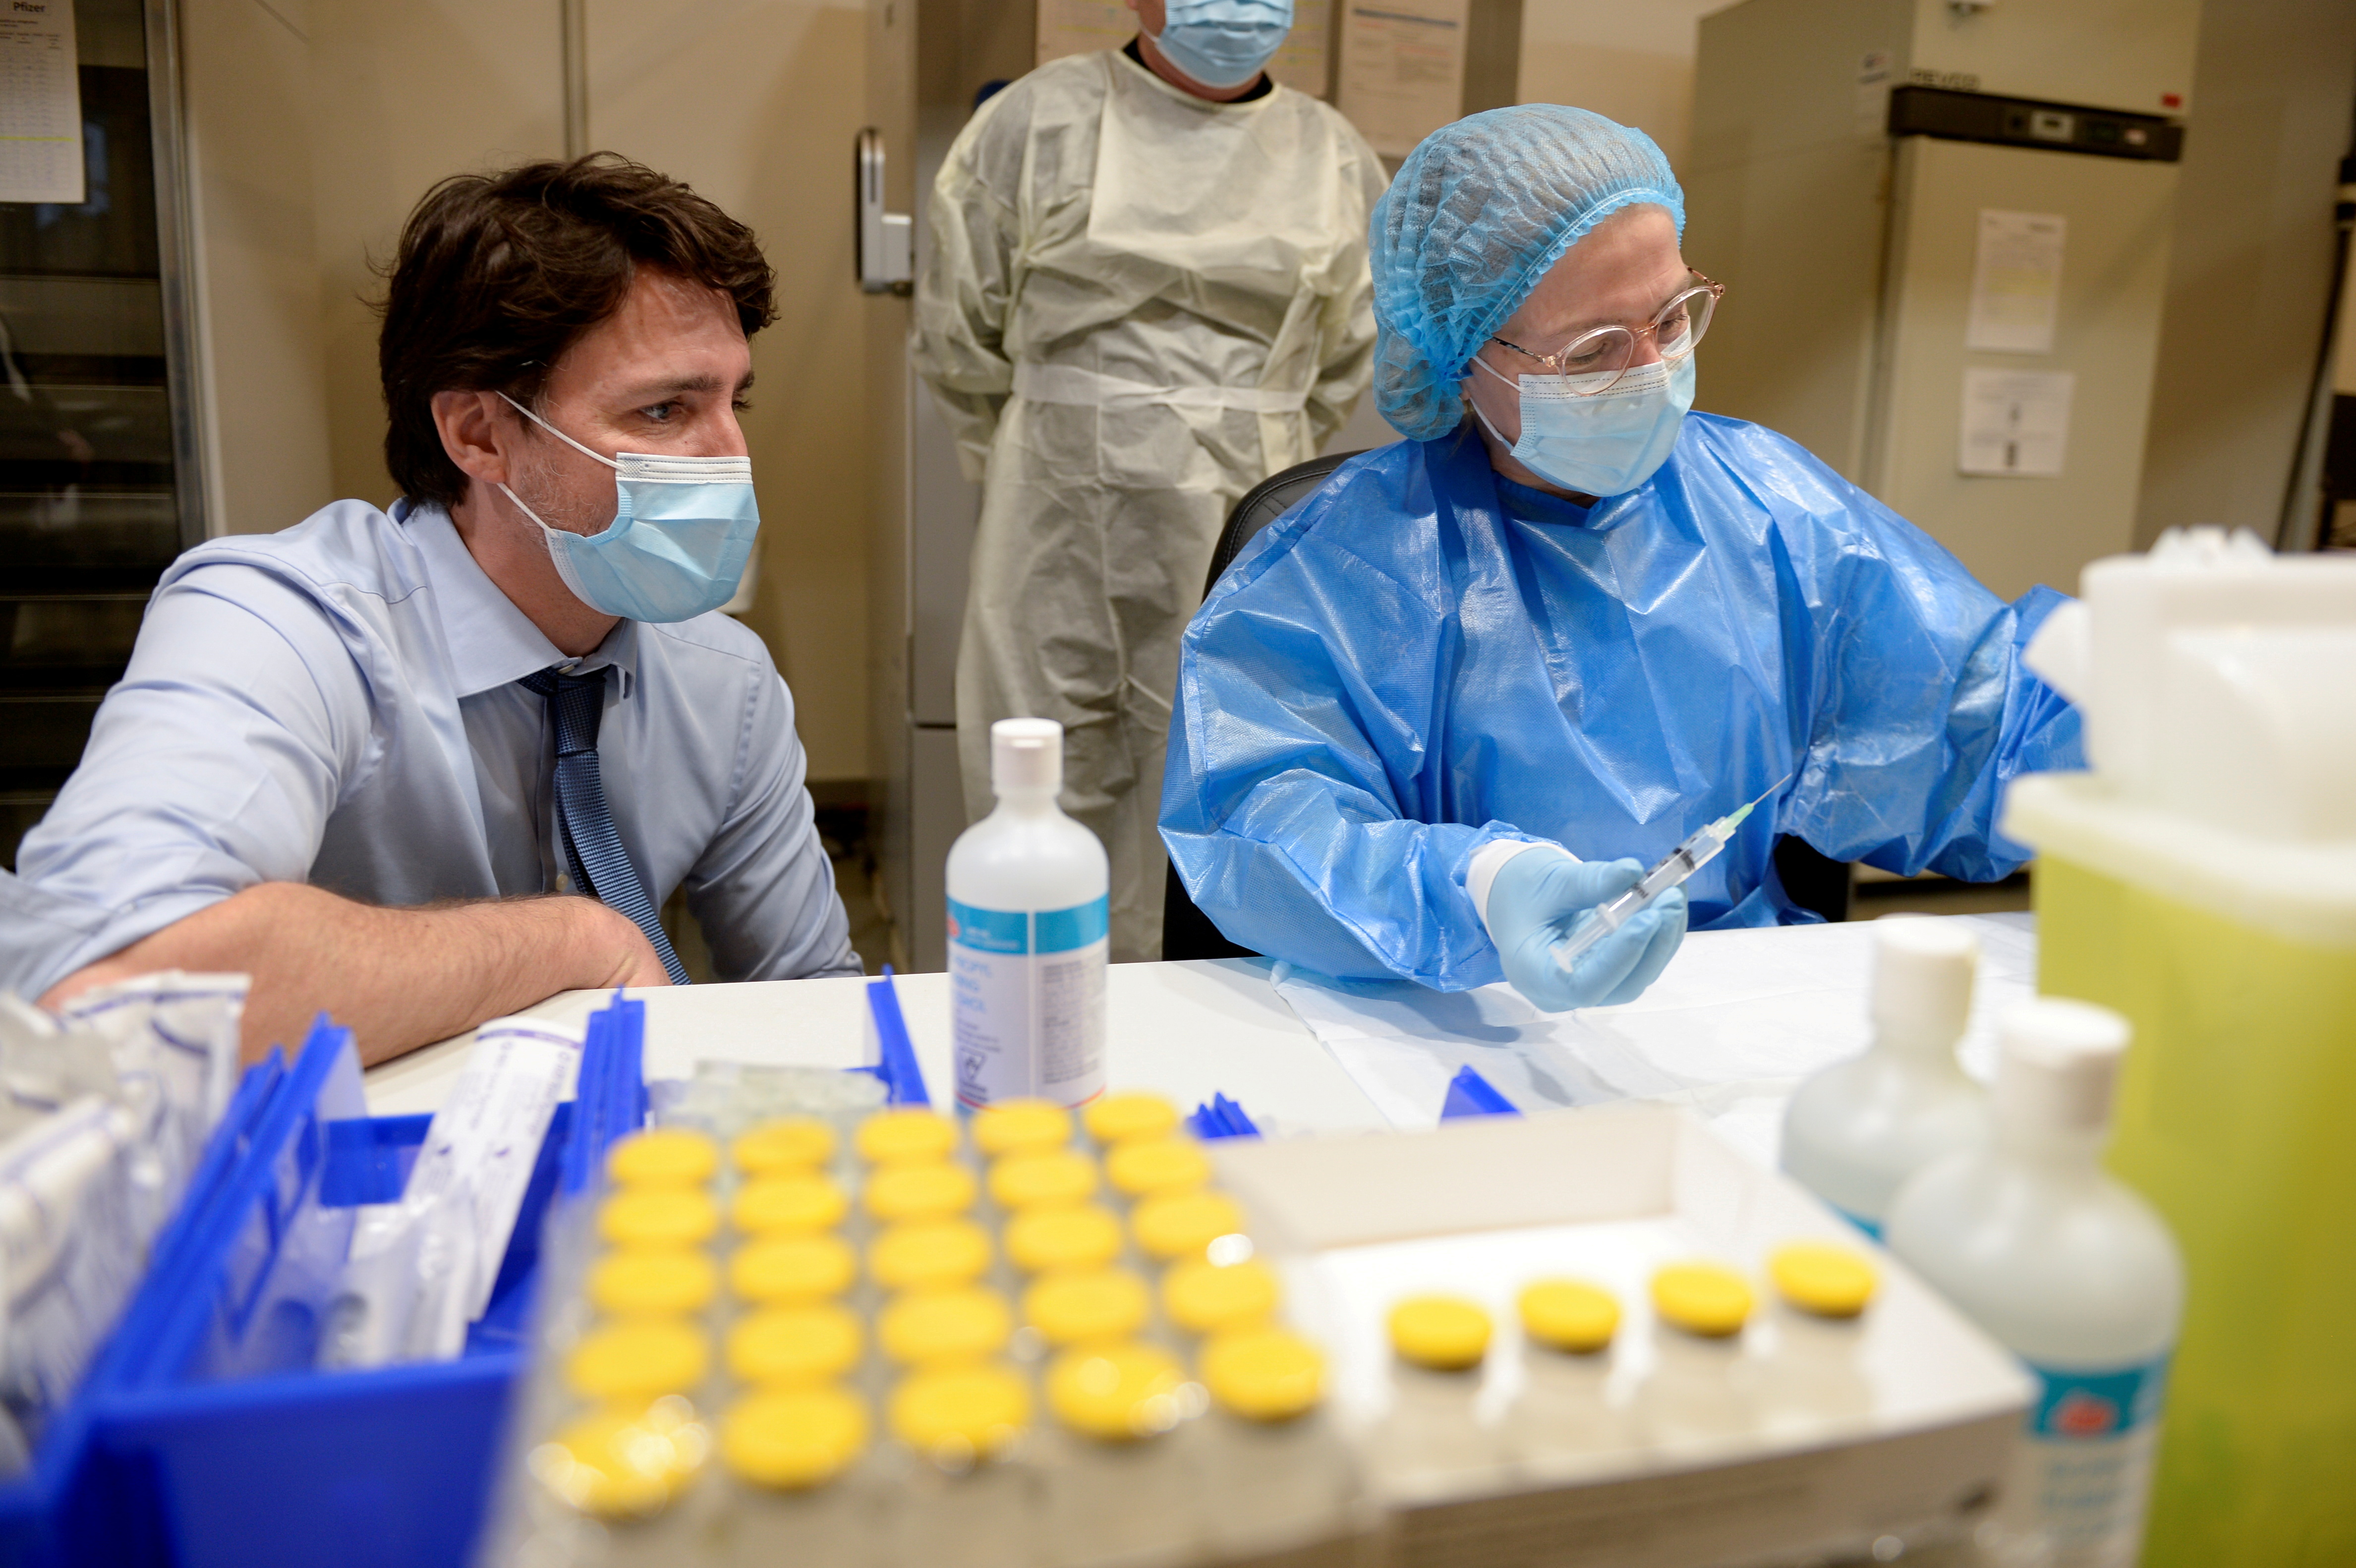 Canada's Prime Minister Justin Trudeau watches the Pfizer-BioNTech vaccine being extracted while he visits a vaccination clinic at the Palais des Congres, as efforts continue to help slow the spread of the coronavirus disease (COVID-19), in Montreal, Quebec, Canada March 15, 2021. REUTERS/Andrej Ivanov